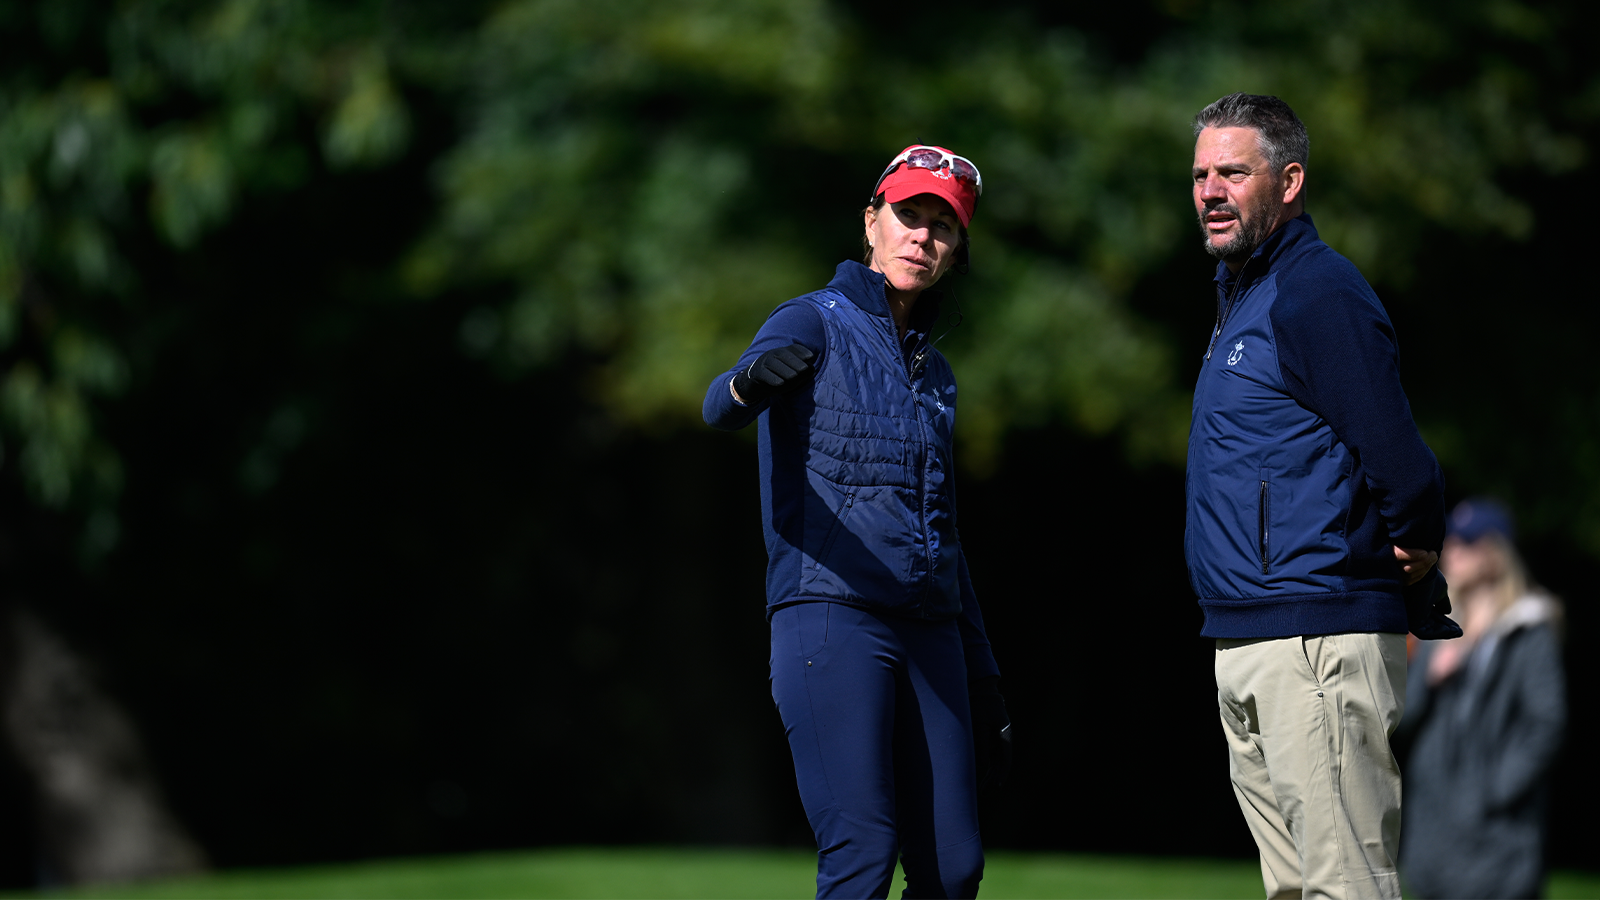 Captain and PGA of America Honorary President, Suzy Whaley and Michael Block of the United States during single matches for the 30th PGA Cup at Foxhills Golf Club on September 18, 2022 in Ottershaw, England. (Photo by Matthew Harris/PGA of America)